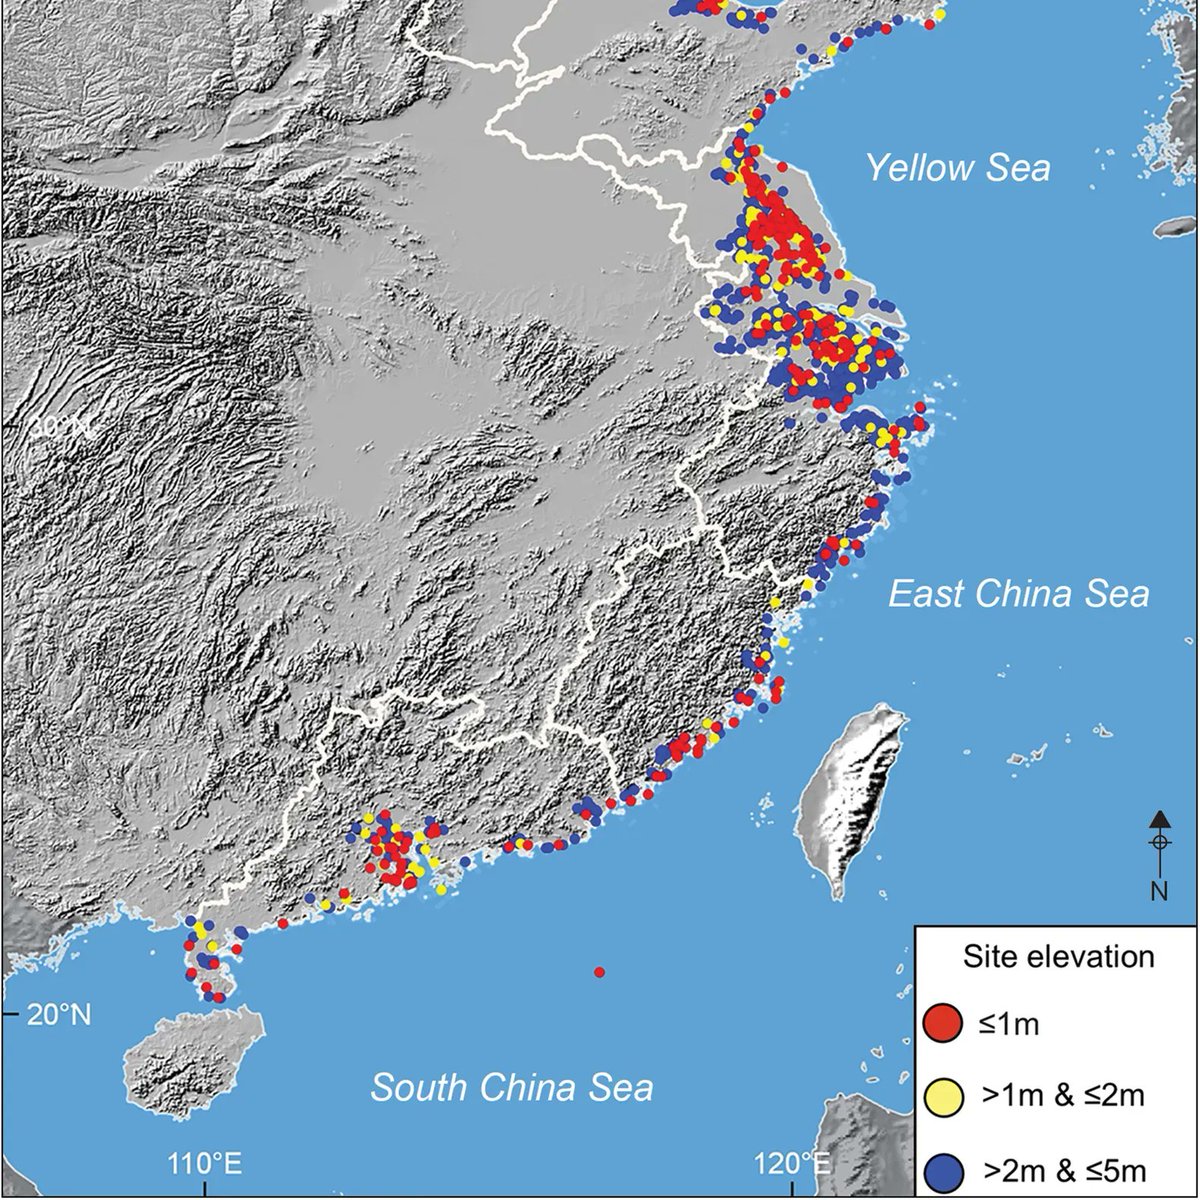 🌊 China's cultural heritage is at risk from climate change, with over 2,000 coastal sites less than 5 metres above sea level, vulnerable to rising oceans. 📷: Sites at risk from sea-level rise; from one of the year's most popular papers (🆓) buff.ly/3Iwg3iN